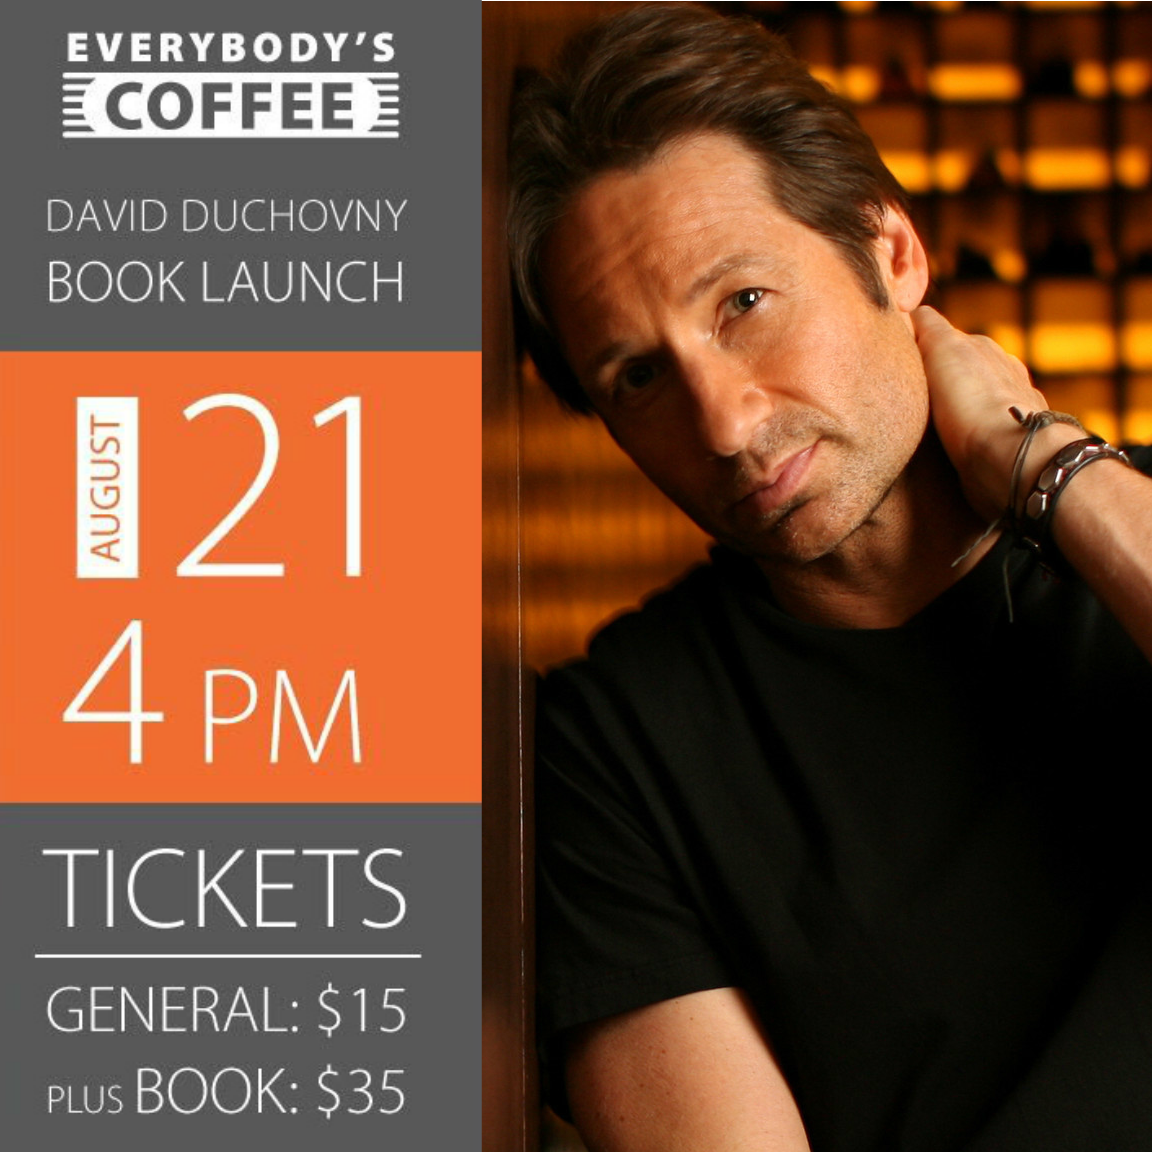 David Duchovny Reading and Book Signing